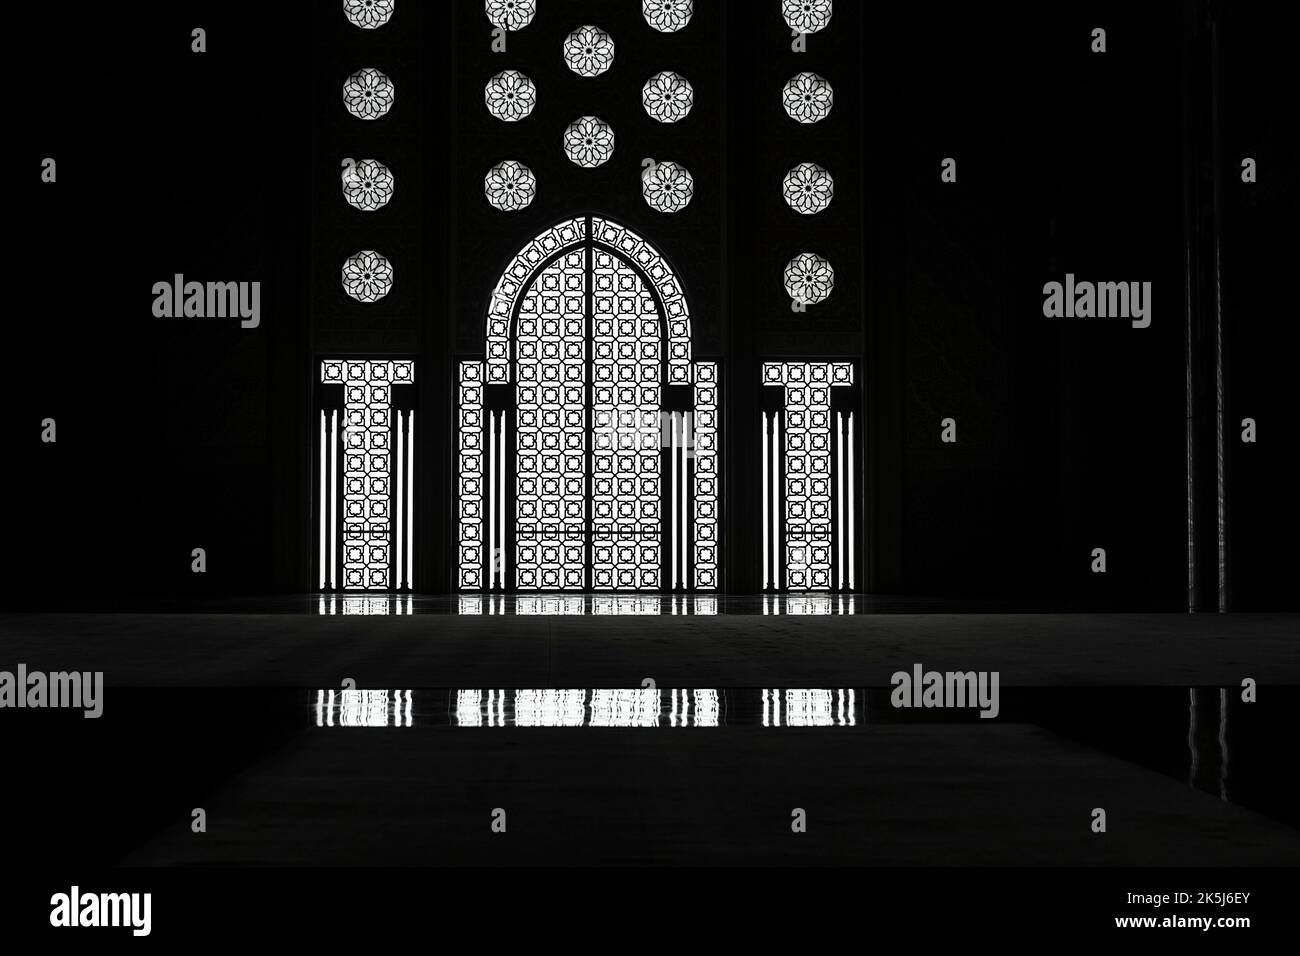 Light incidence in the darkness, interior door and window, arabesque, ornaments in the Hassan II Mosque, backlight with reflection, architecture Stock Photo